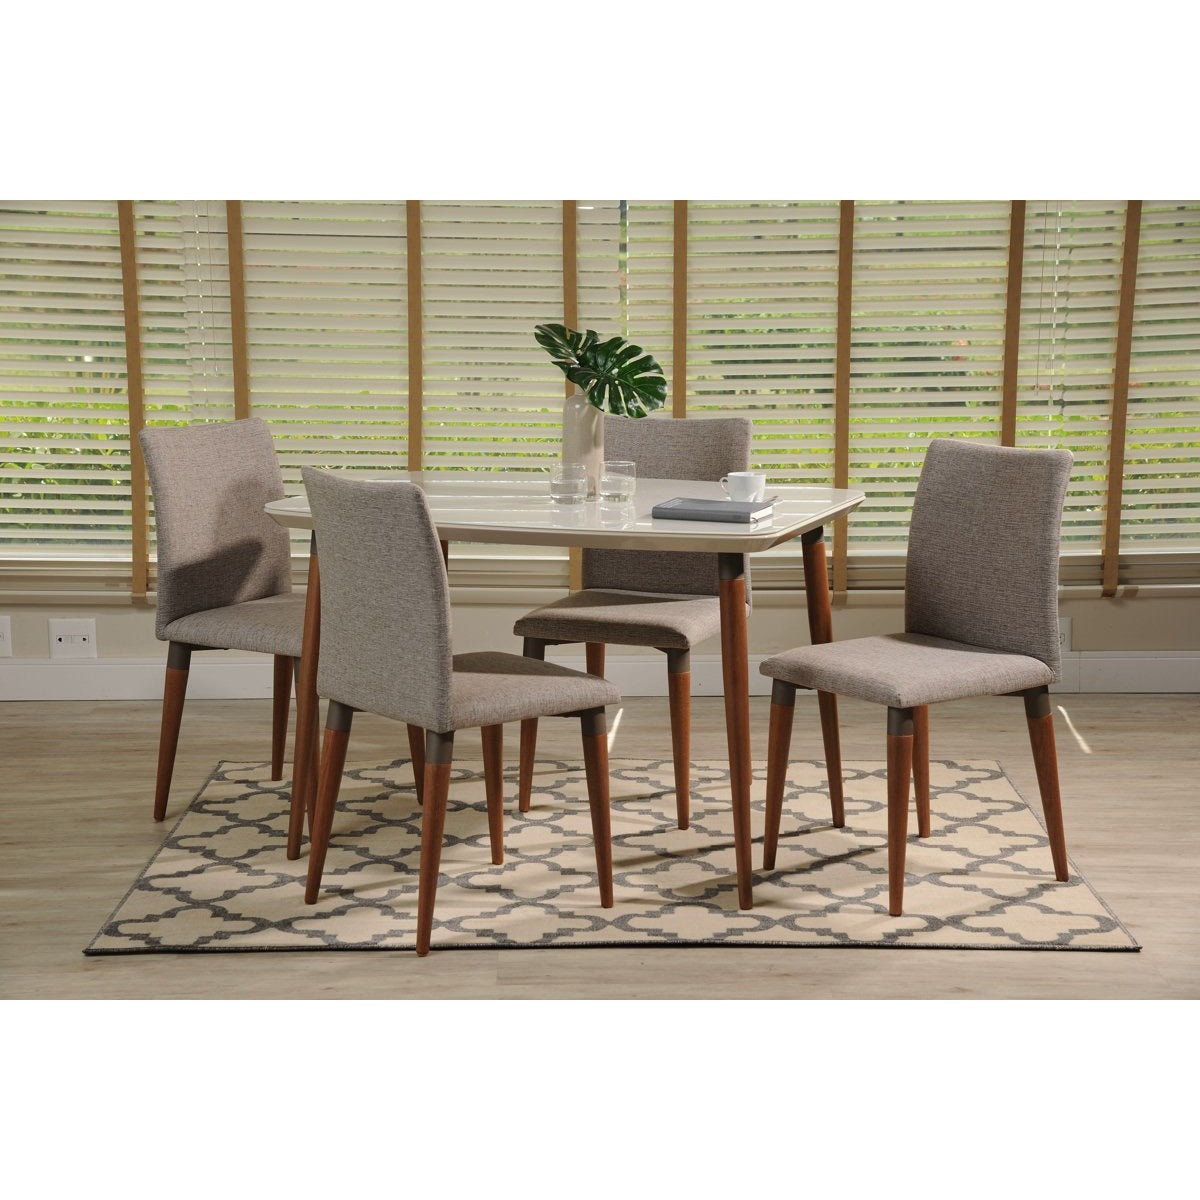 Manhattan Comfort 5-Piece Charles 45.27" Dining Set with 4 Dining Chairs in Off White and Grey-Minimal & Modern